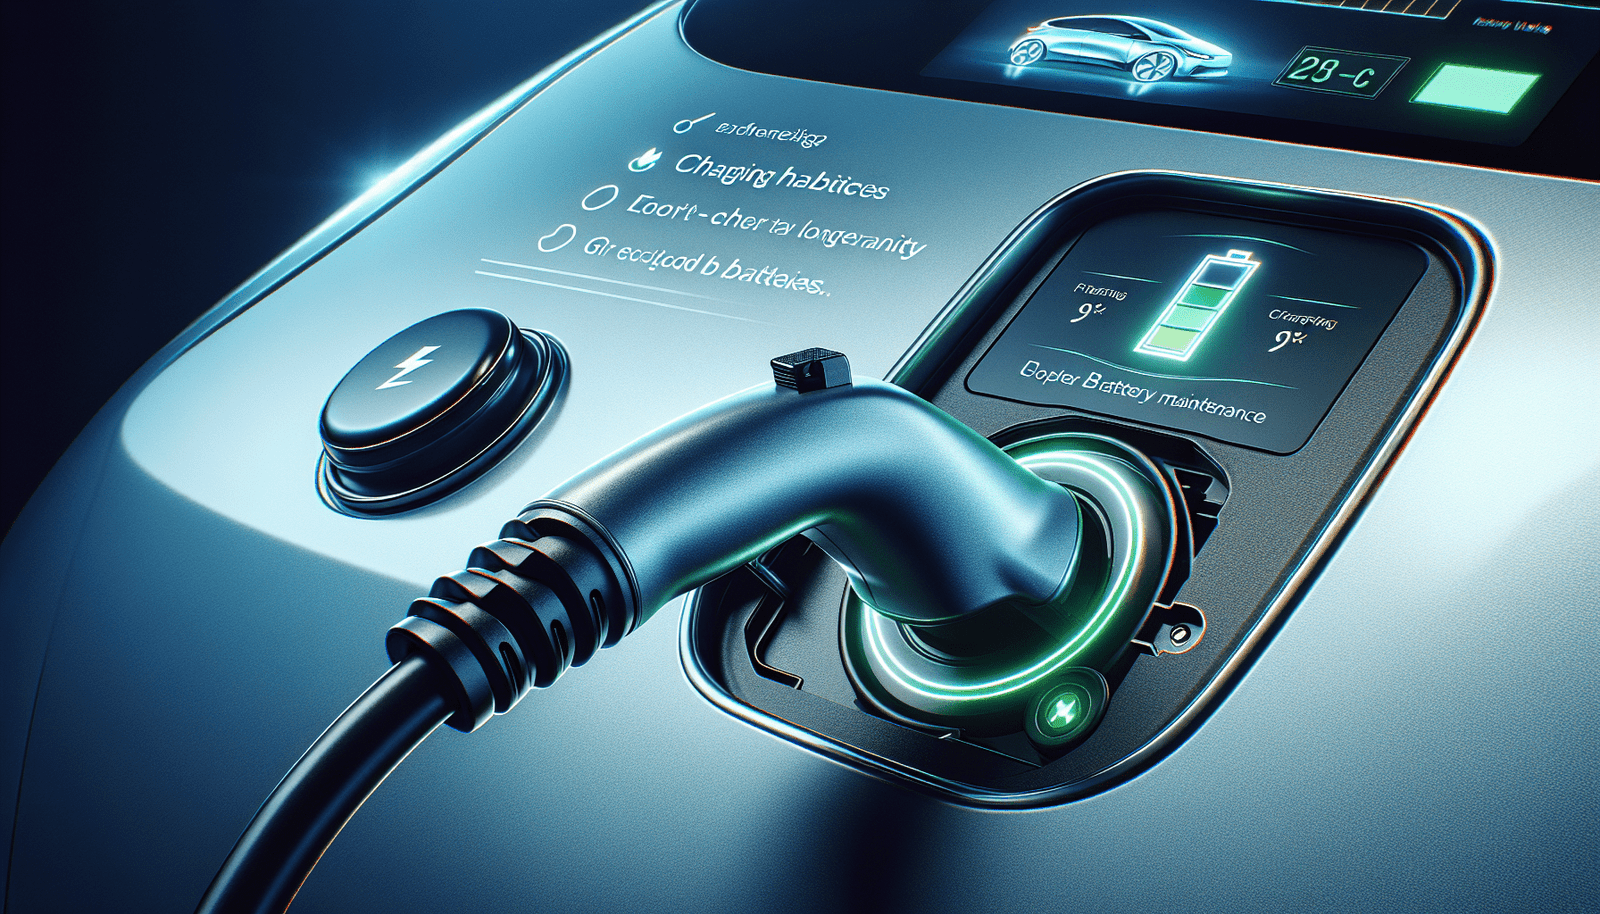 What Are The Best Practices For Maintaining And Prolonging The Battery Life Of EVs?